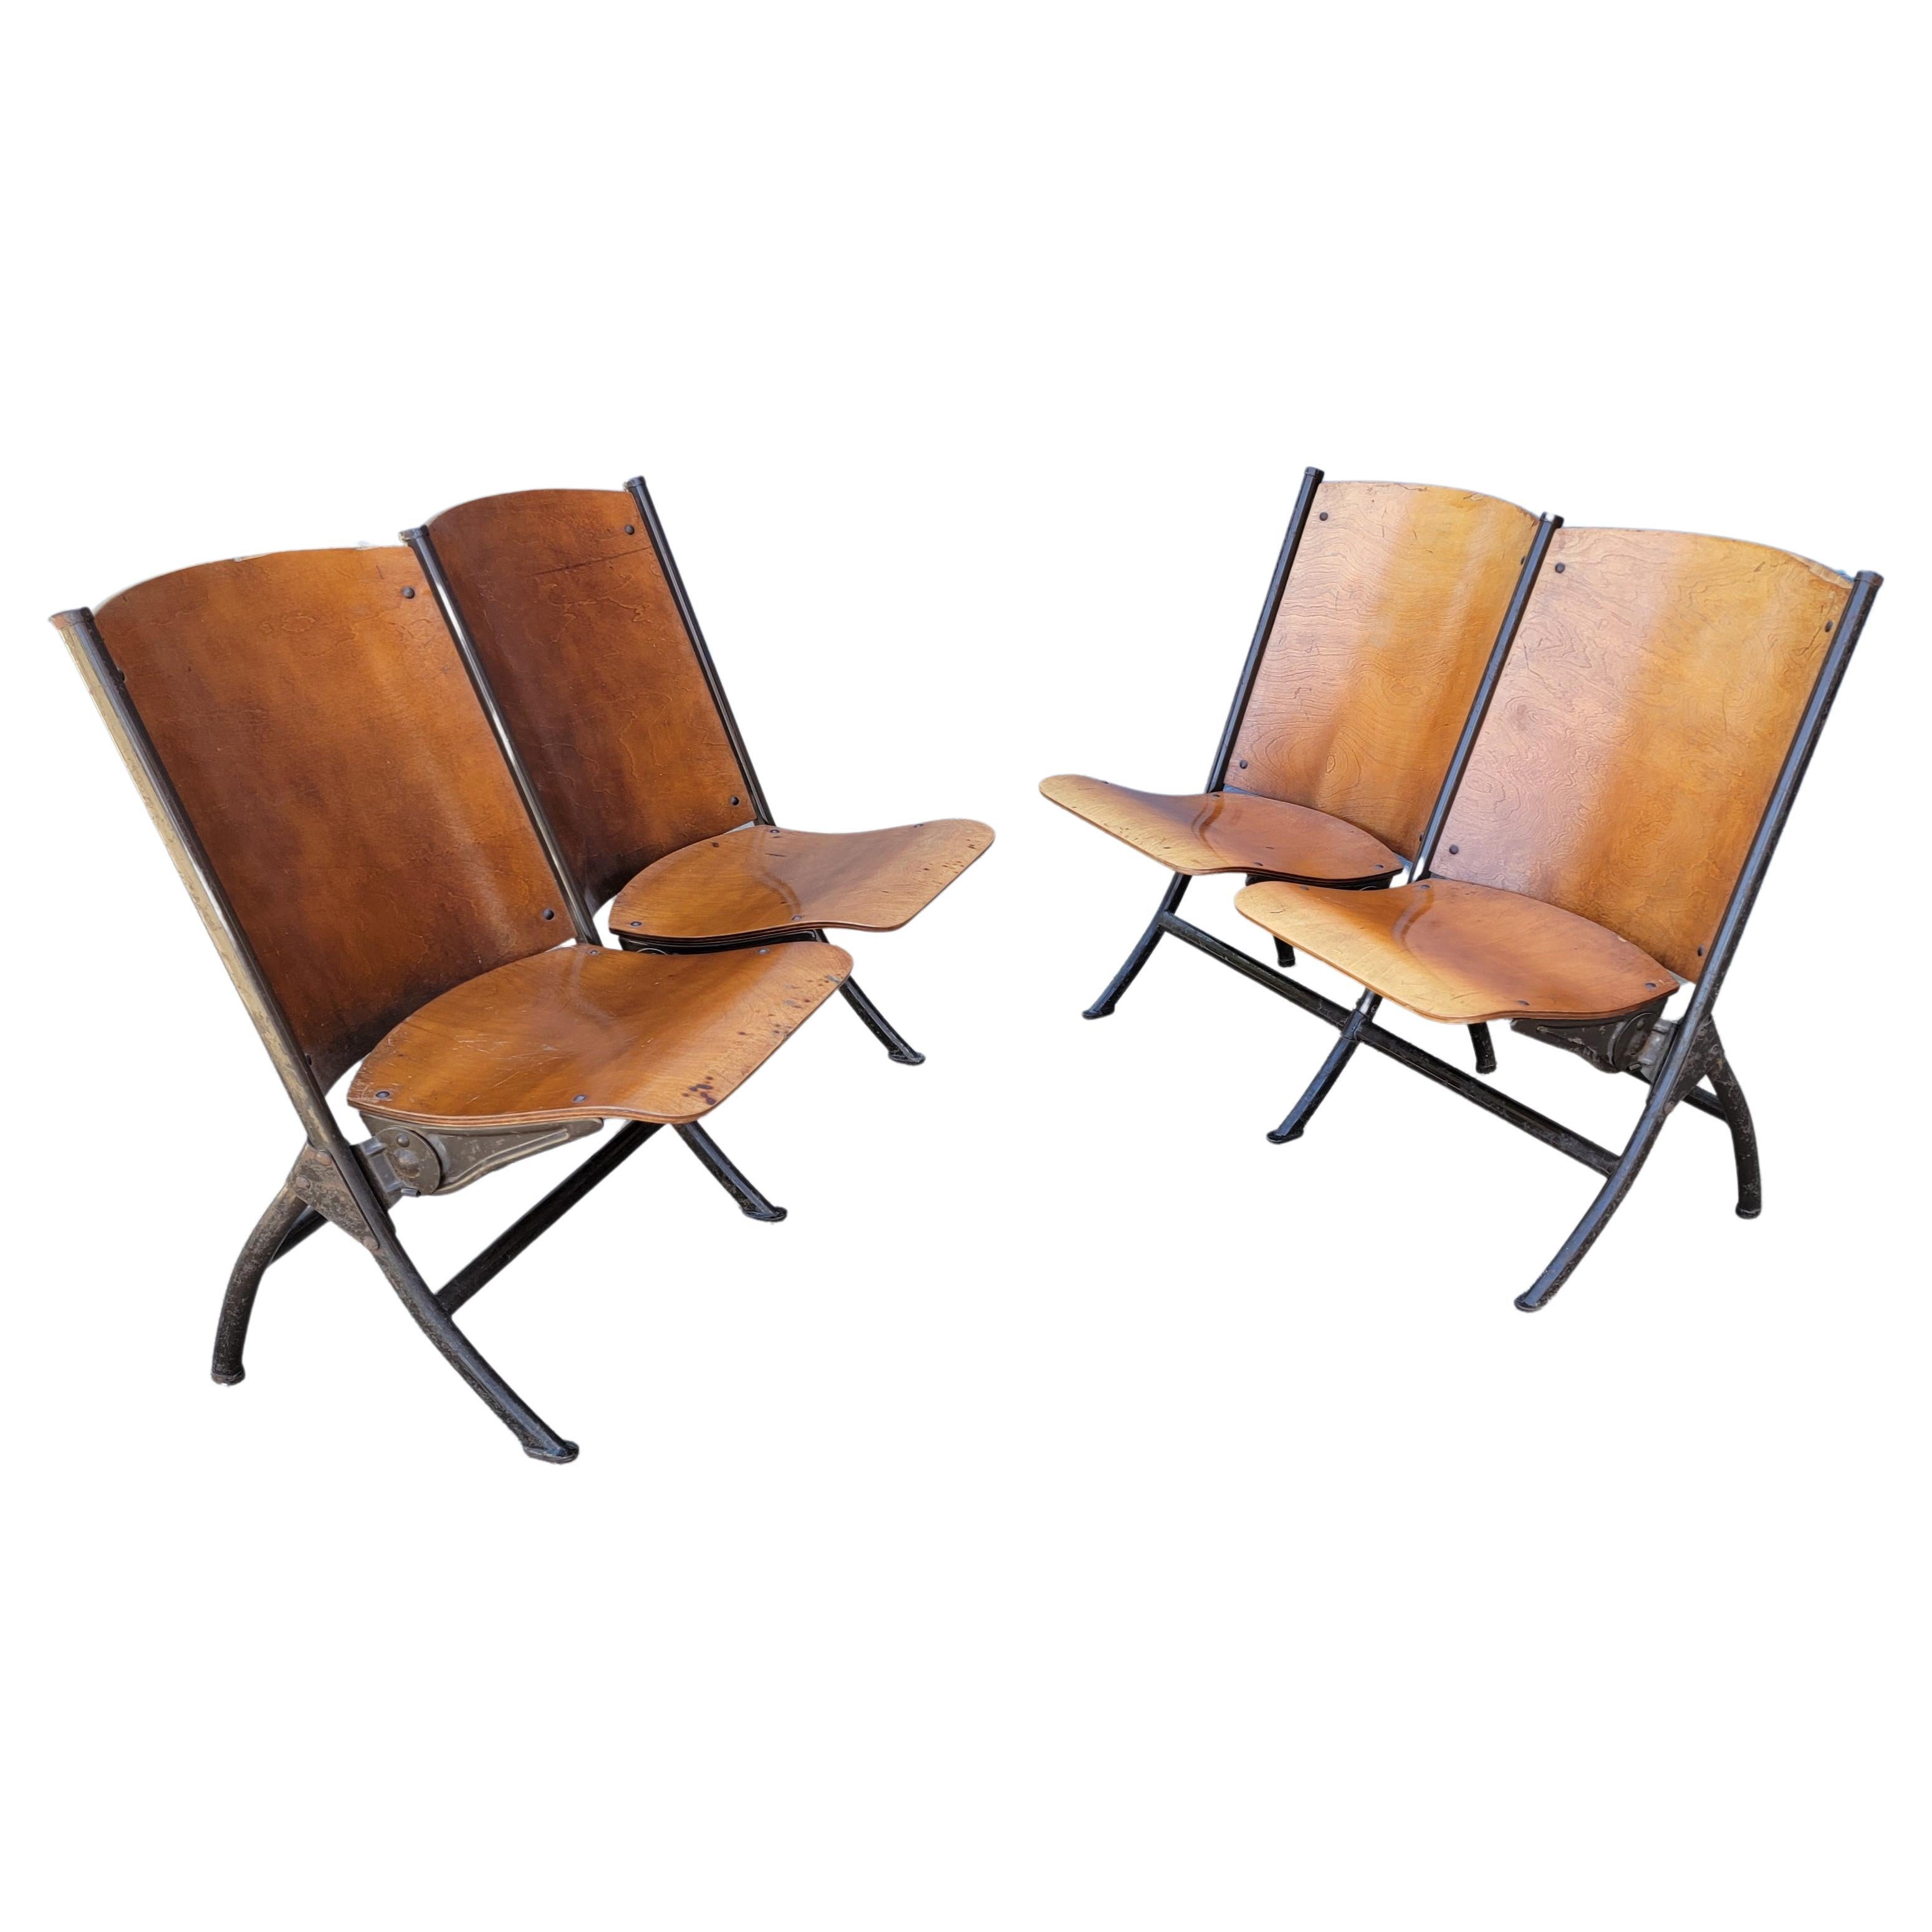 Industrial Folding Theater Chairs, 1930's